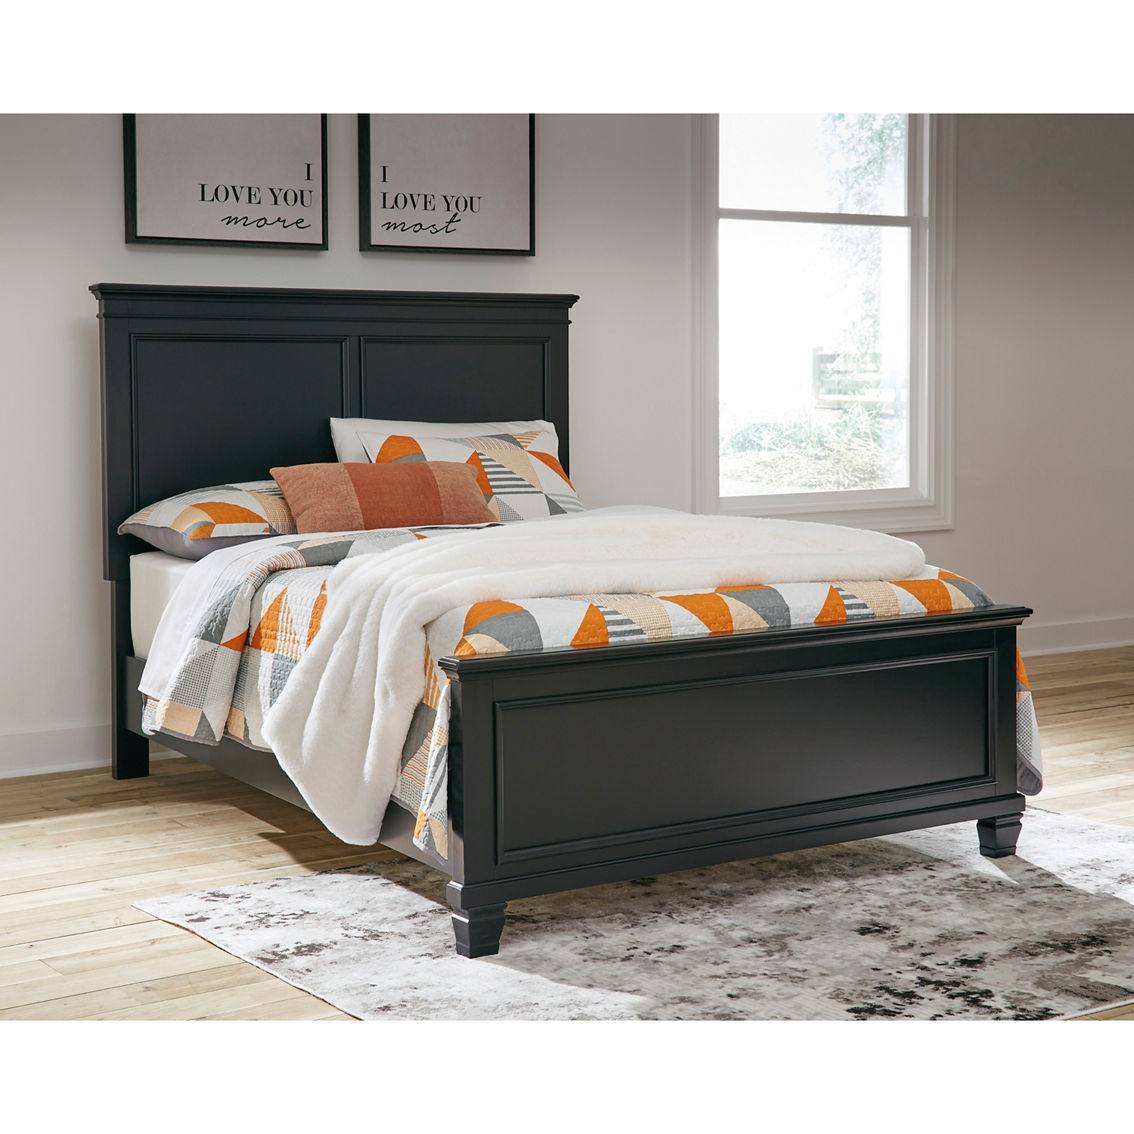 Signature Design by Ashley Lanolee Panel Bed - Image 6 of 7